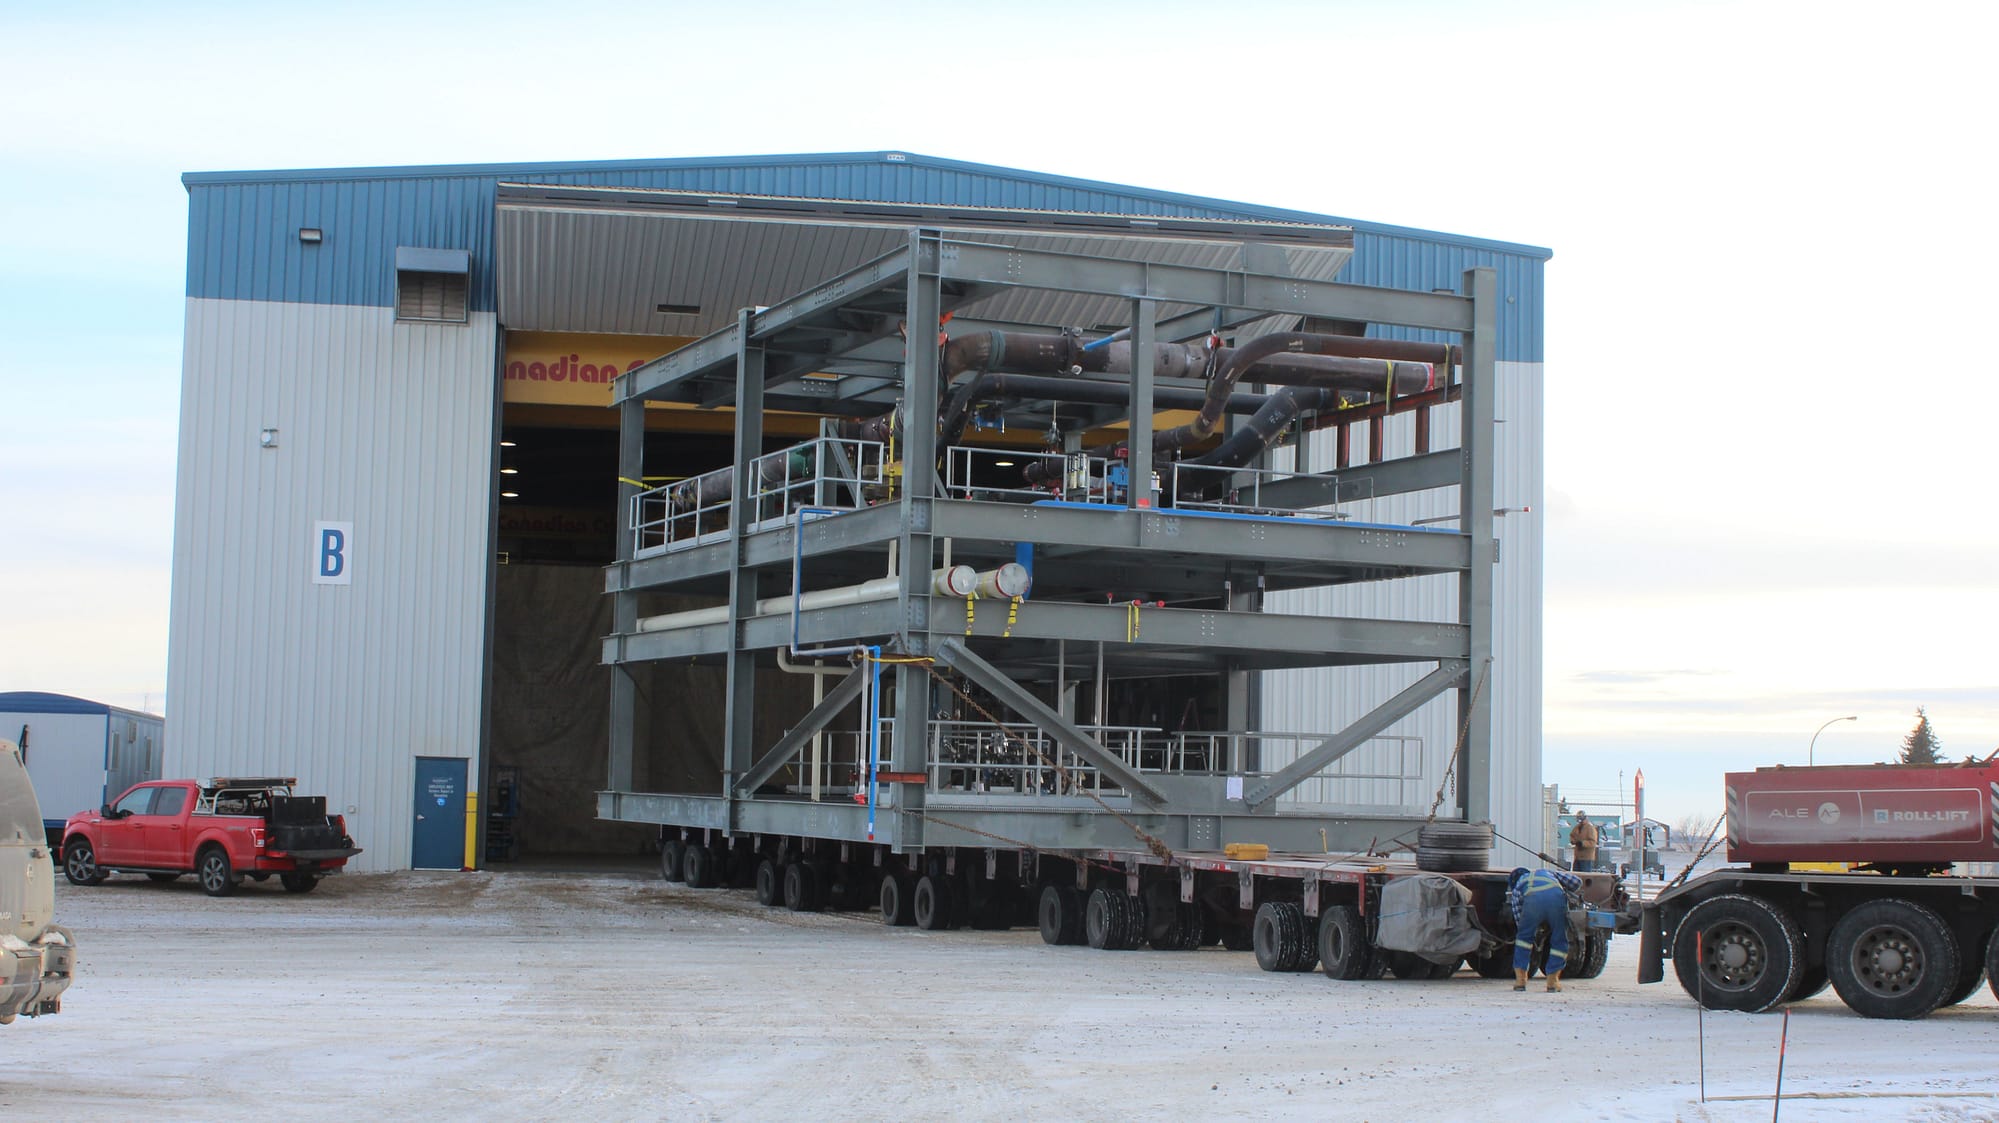 HRSG & STG Pipe Rack Modules for the SaskPower Chinook Power Station, Power Generation, Modules, Carbon Steel